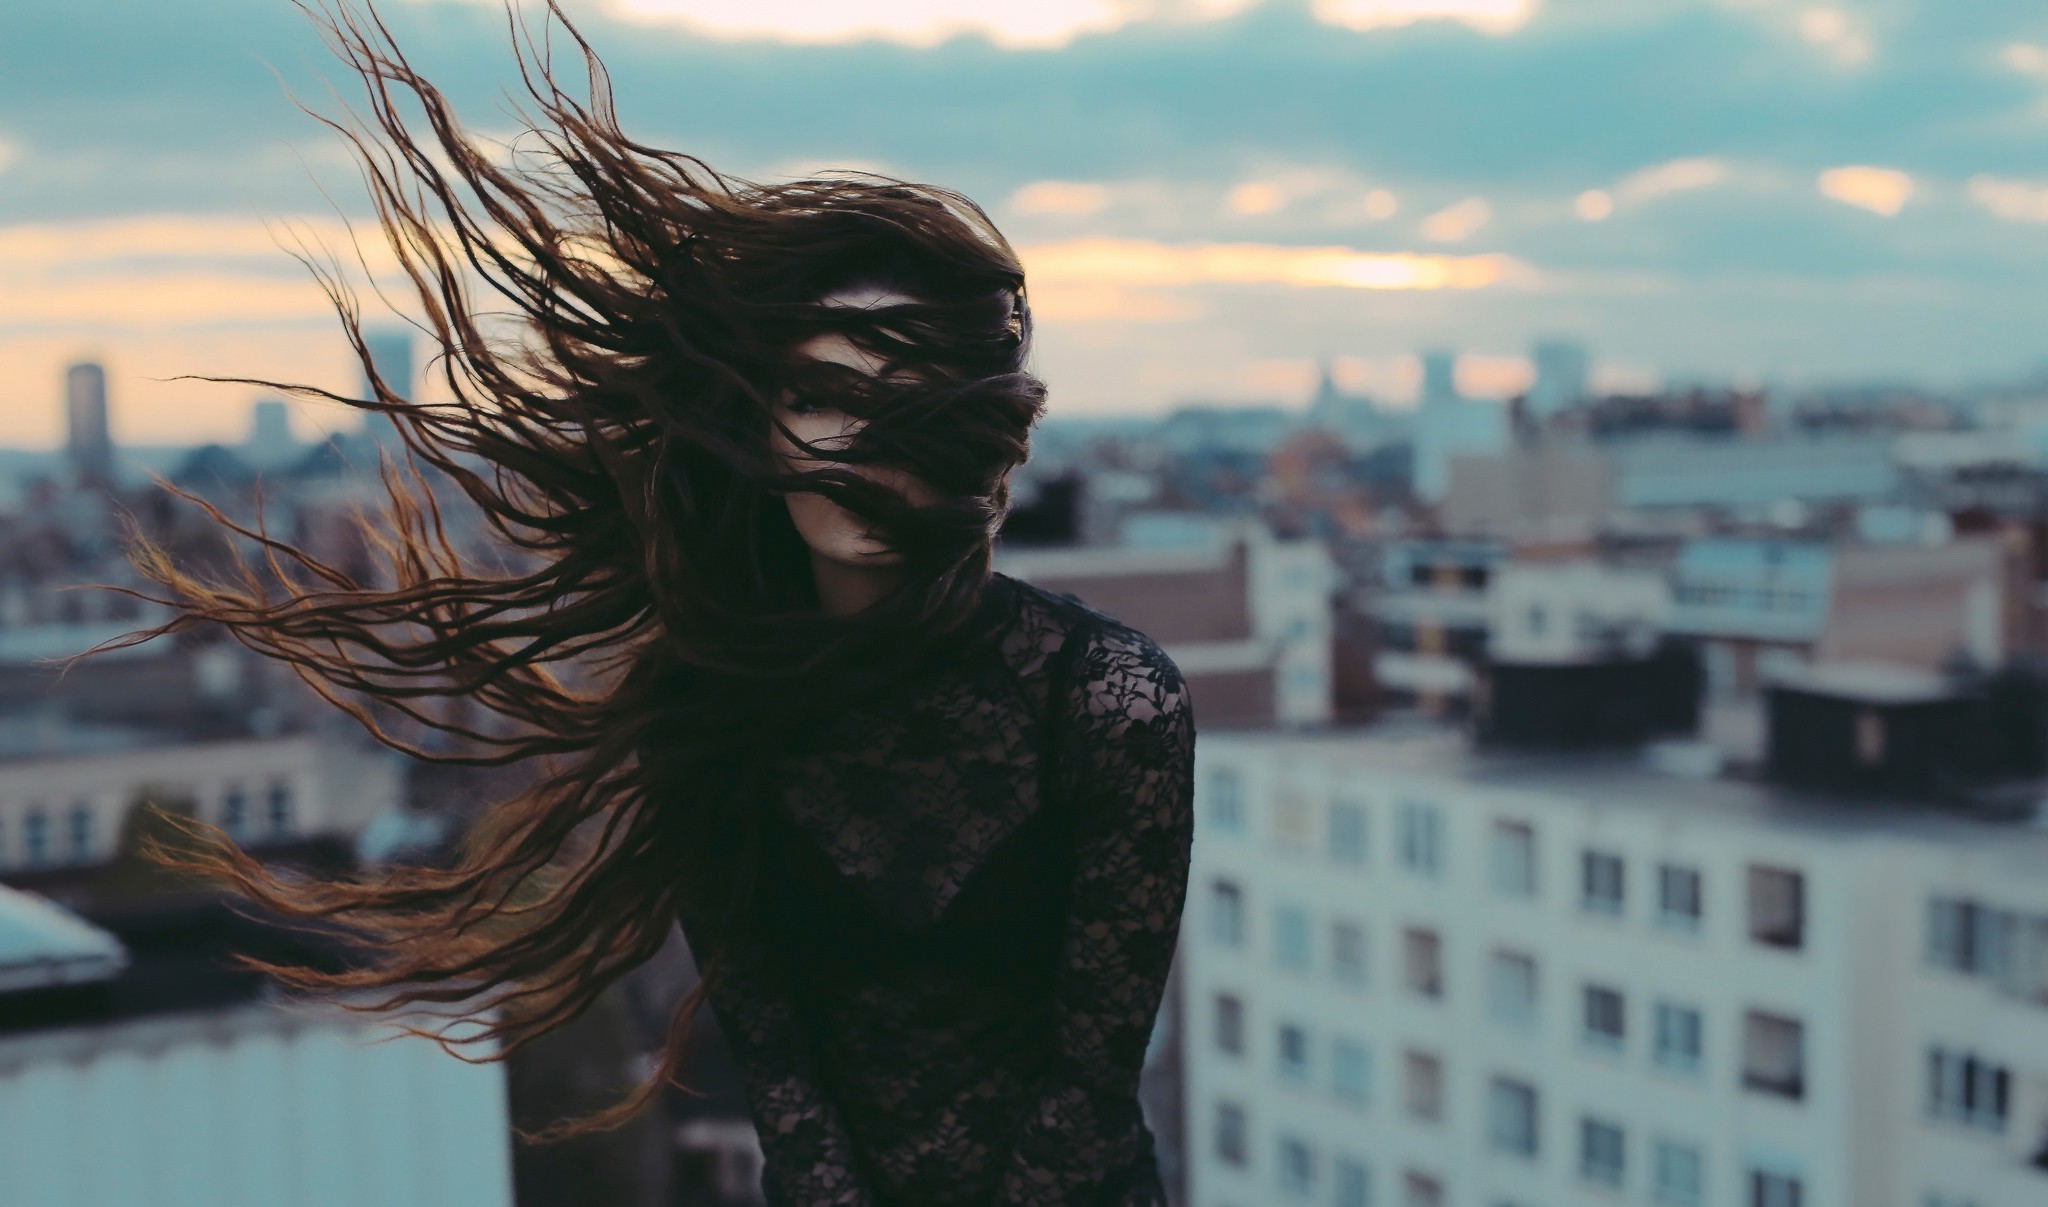 hair In Face, Brunette, David Olkarny, Windy, Wind, See through Clothing, Rooftops, Skyline, Brussels Wallpaper